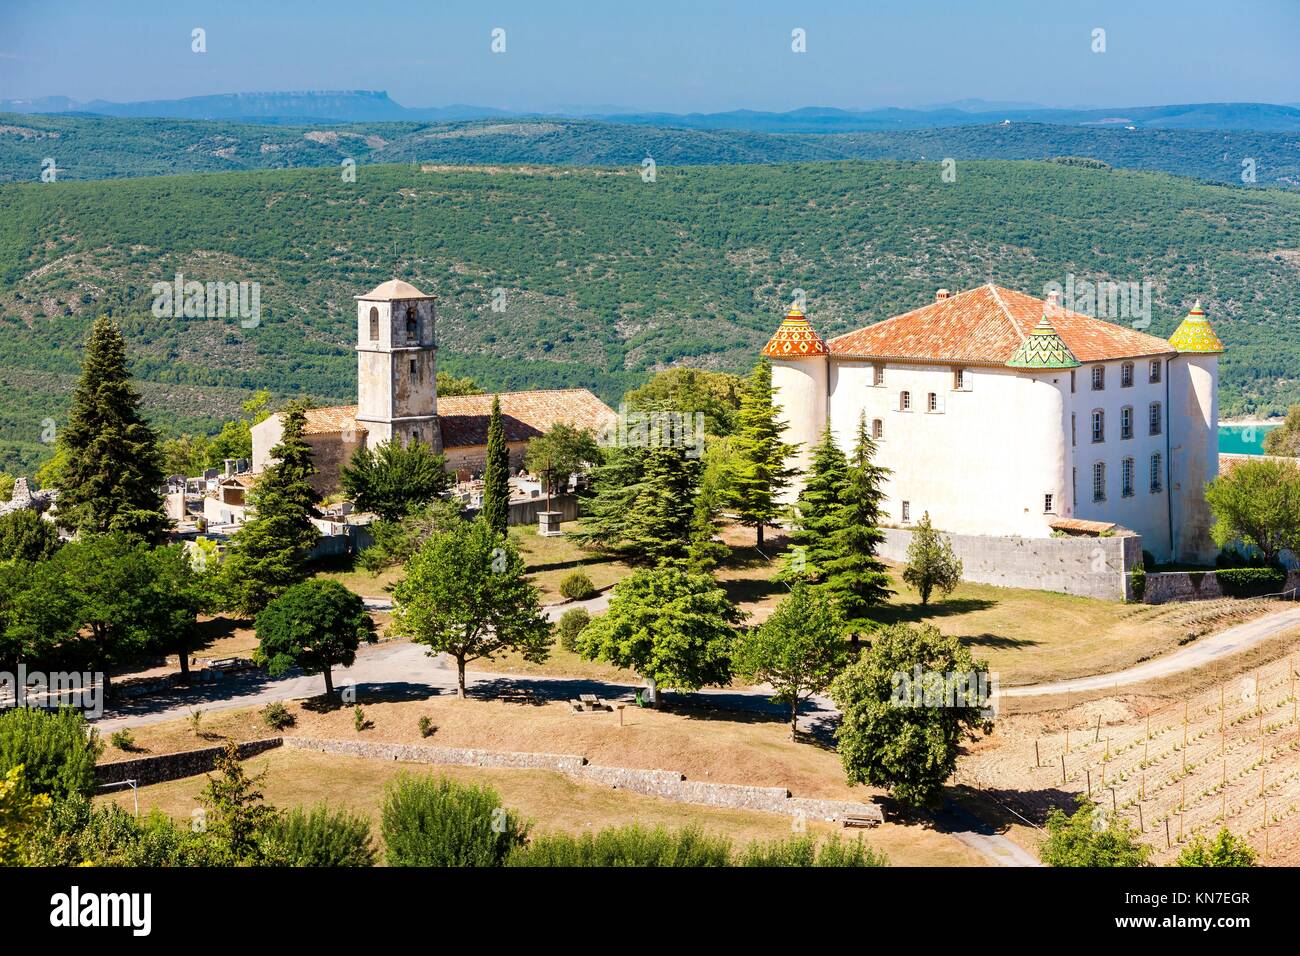 chateau and church in Aiguines, Var Department, Provence, France. Stock Photo